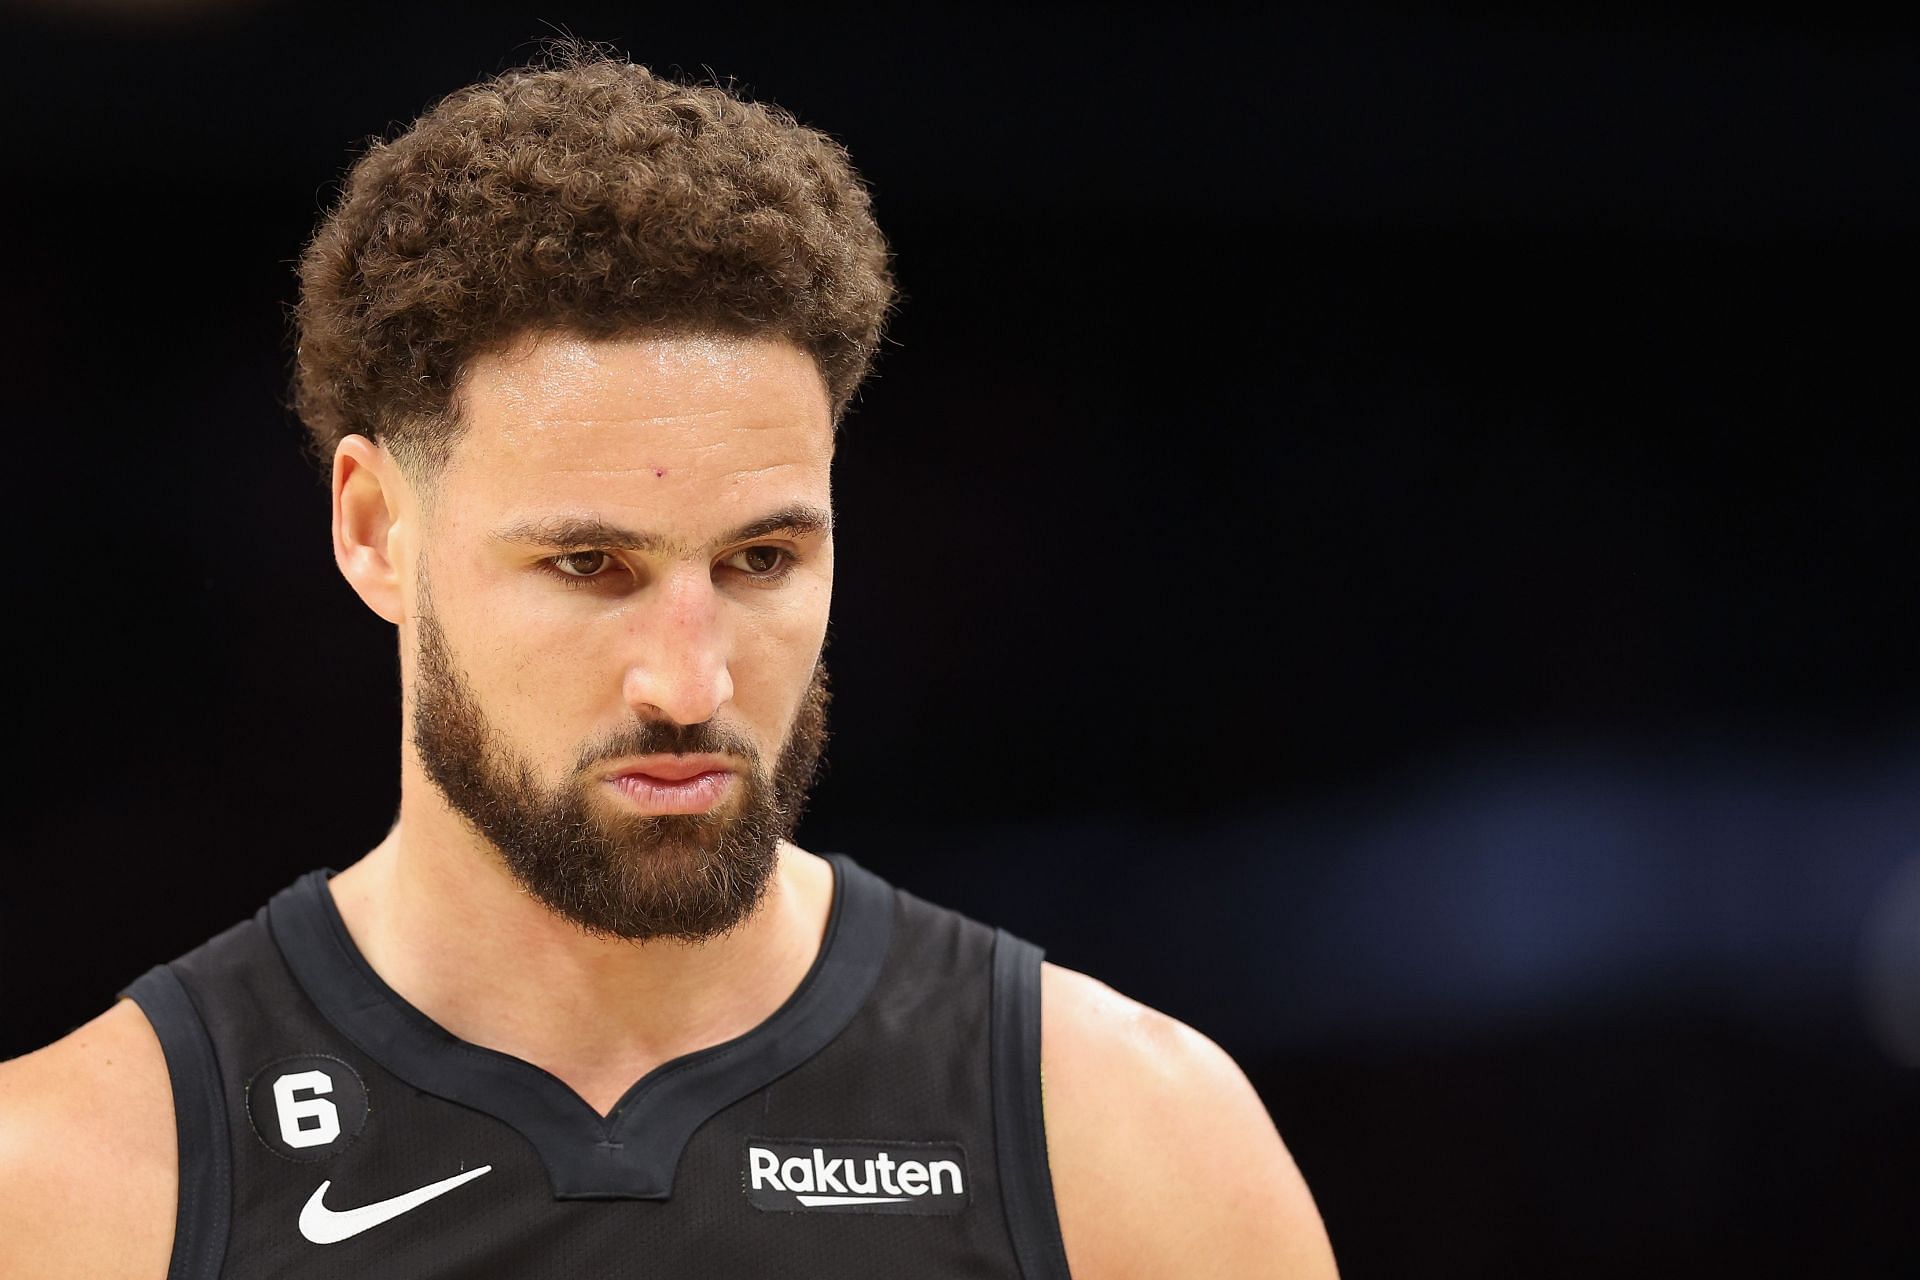 Stephen A. Smith demands more contribution & effort from Klay Thompson  after his mediocre season start: “Klay Thompson, my brother, we all know  you were hurt”